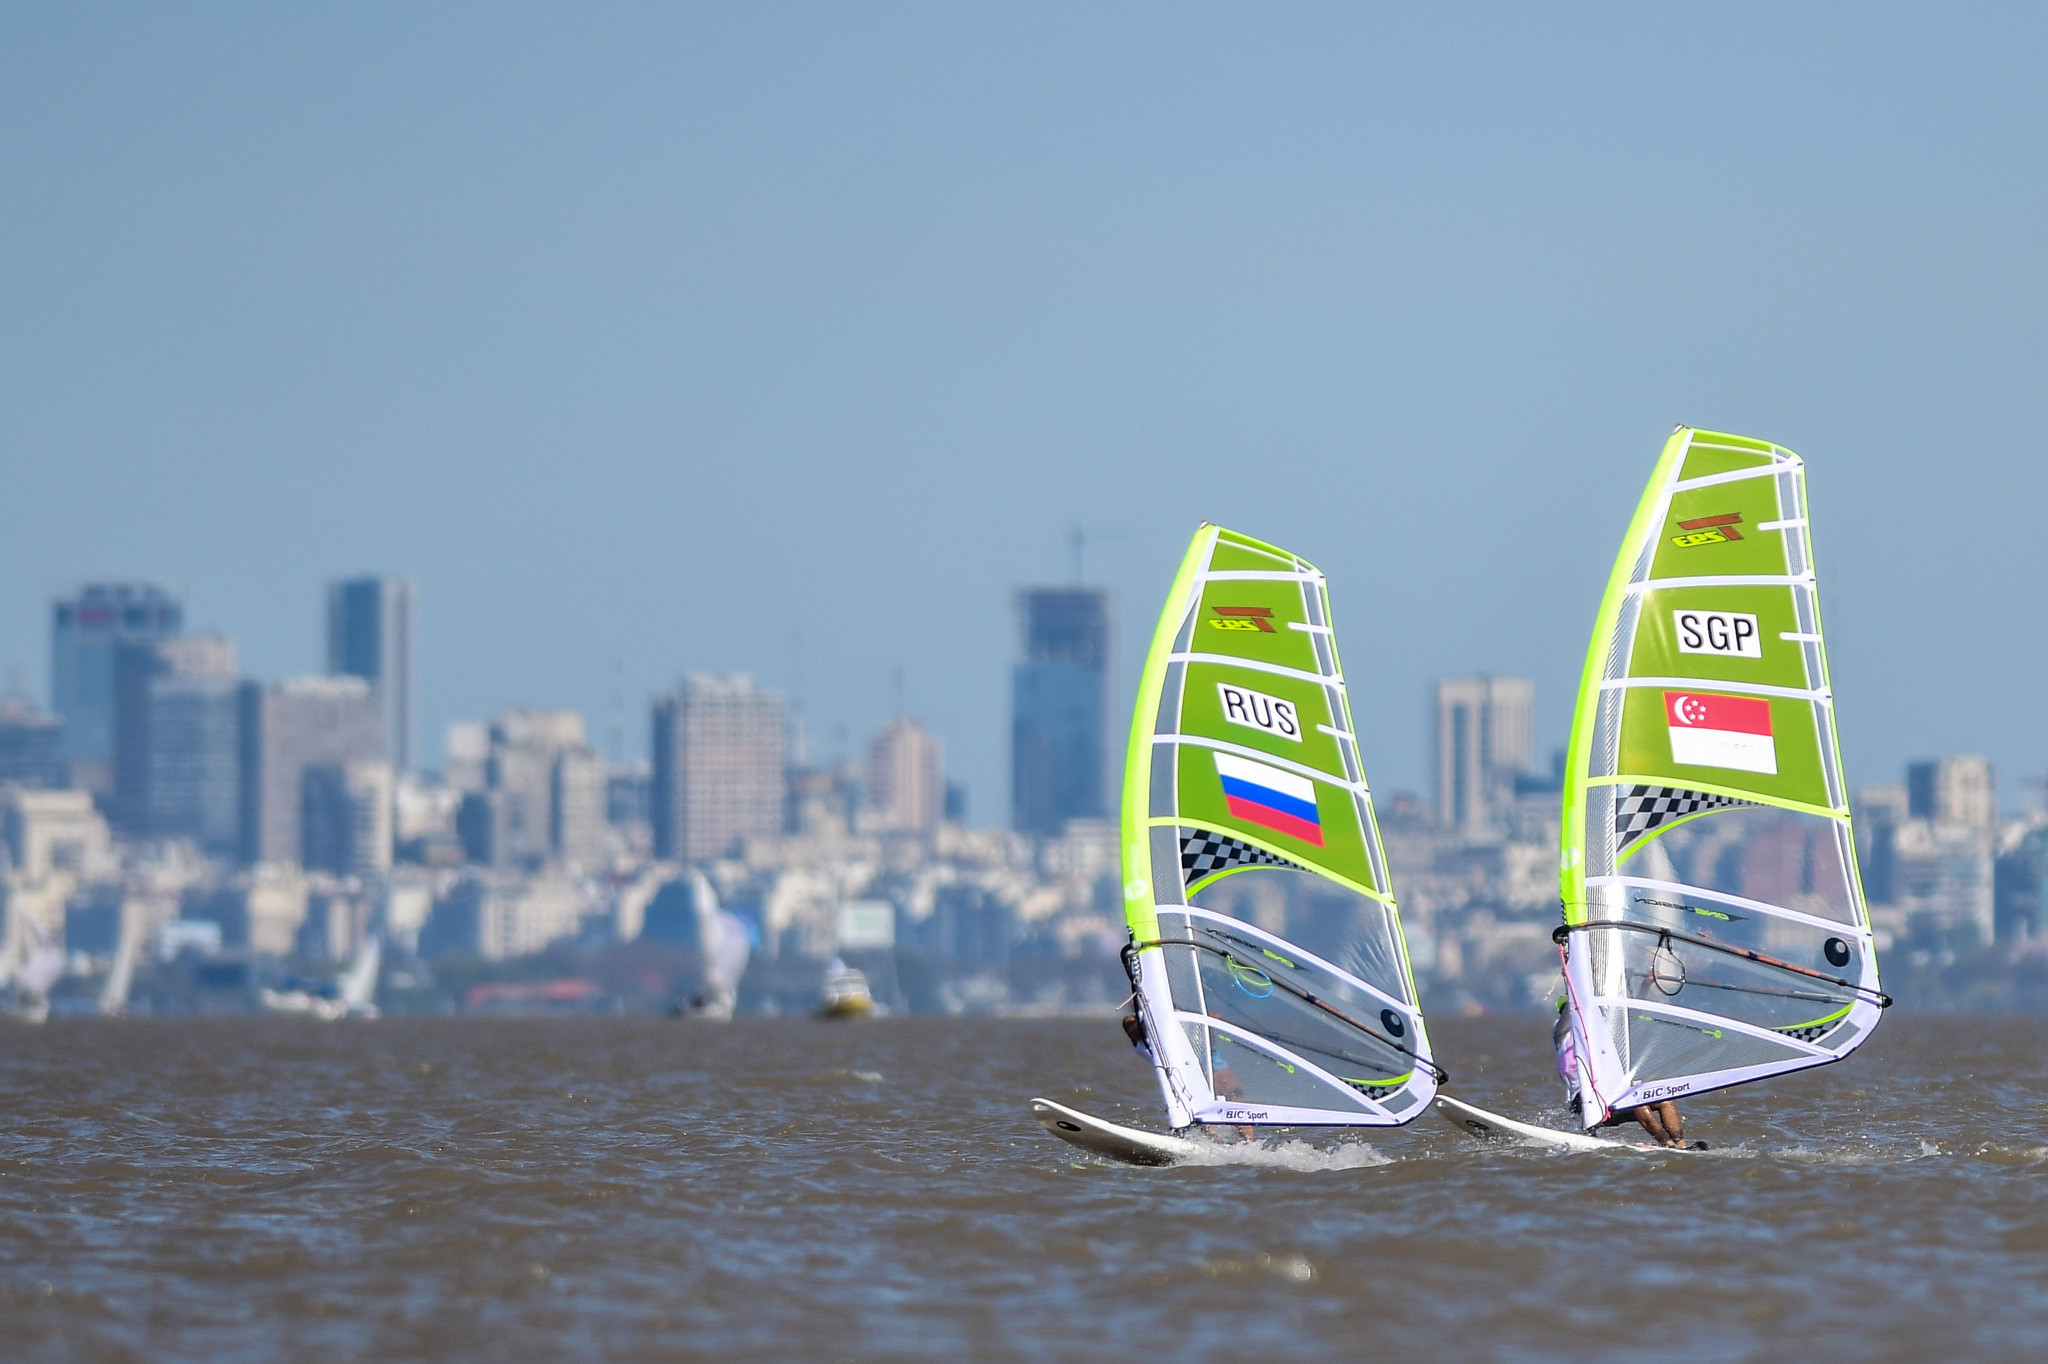 Youth Olympic Games bronze medallist Yana Reznikova leads Russian hopes for success at the RS:X Windsurfing Youth World Championships at the Yacht Club of Saint-Petersburg ©Getty Images